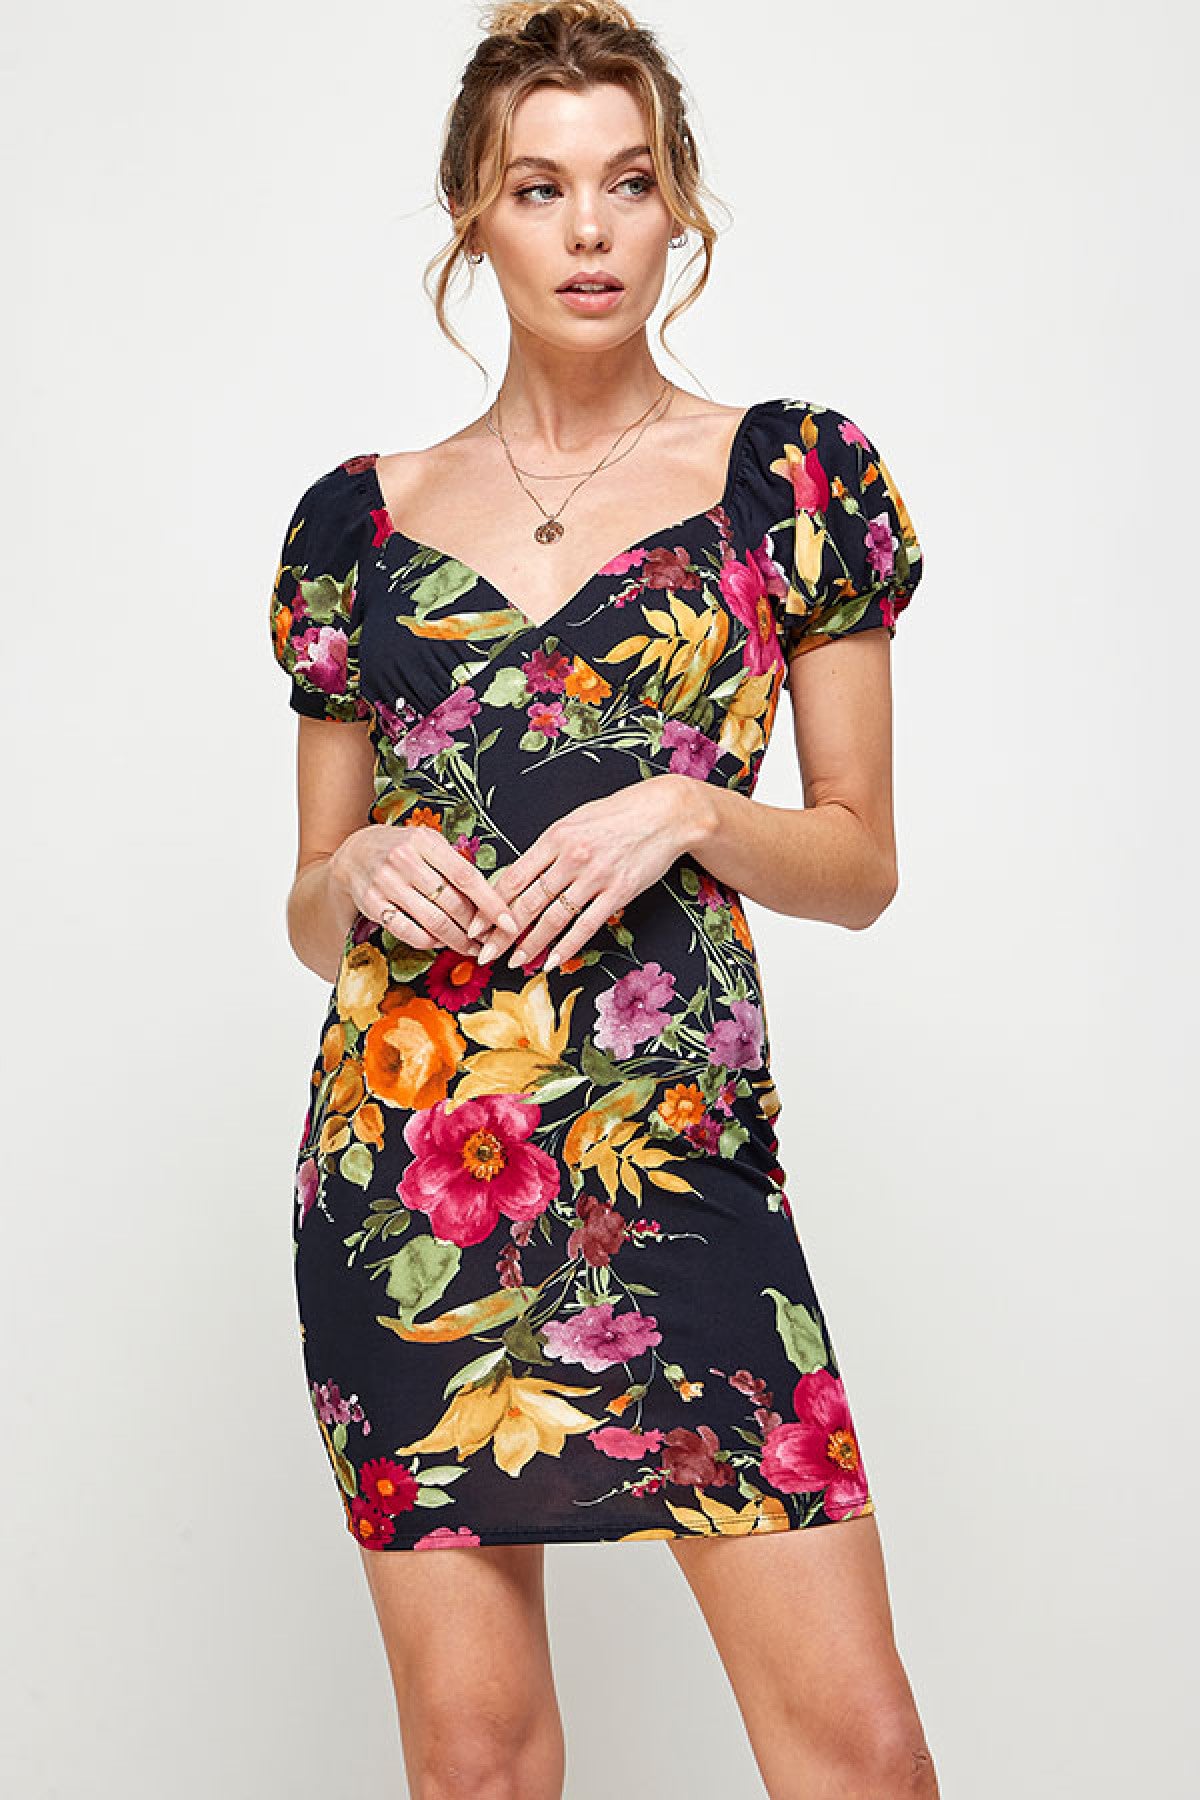 BLACK FLORAL PRINT SQUARE NECKLINE CUFFED PUFFED SLEEVES DRESS (NOW $9.75 ONLY!)